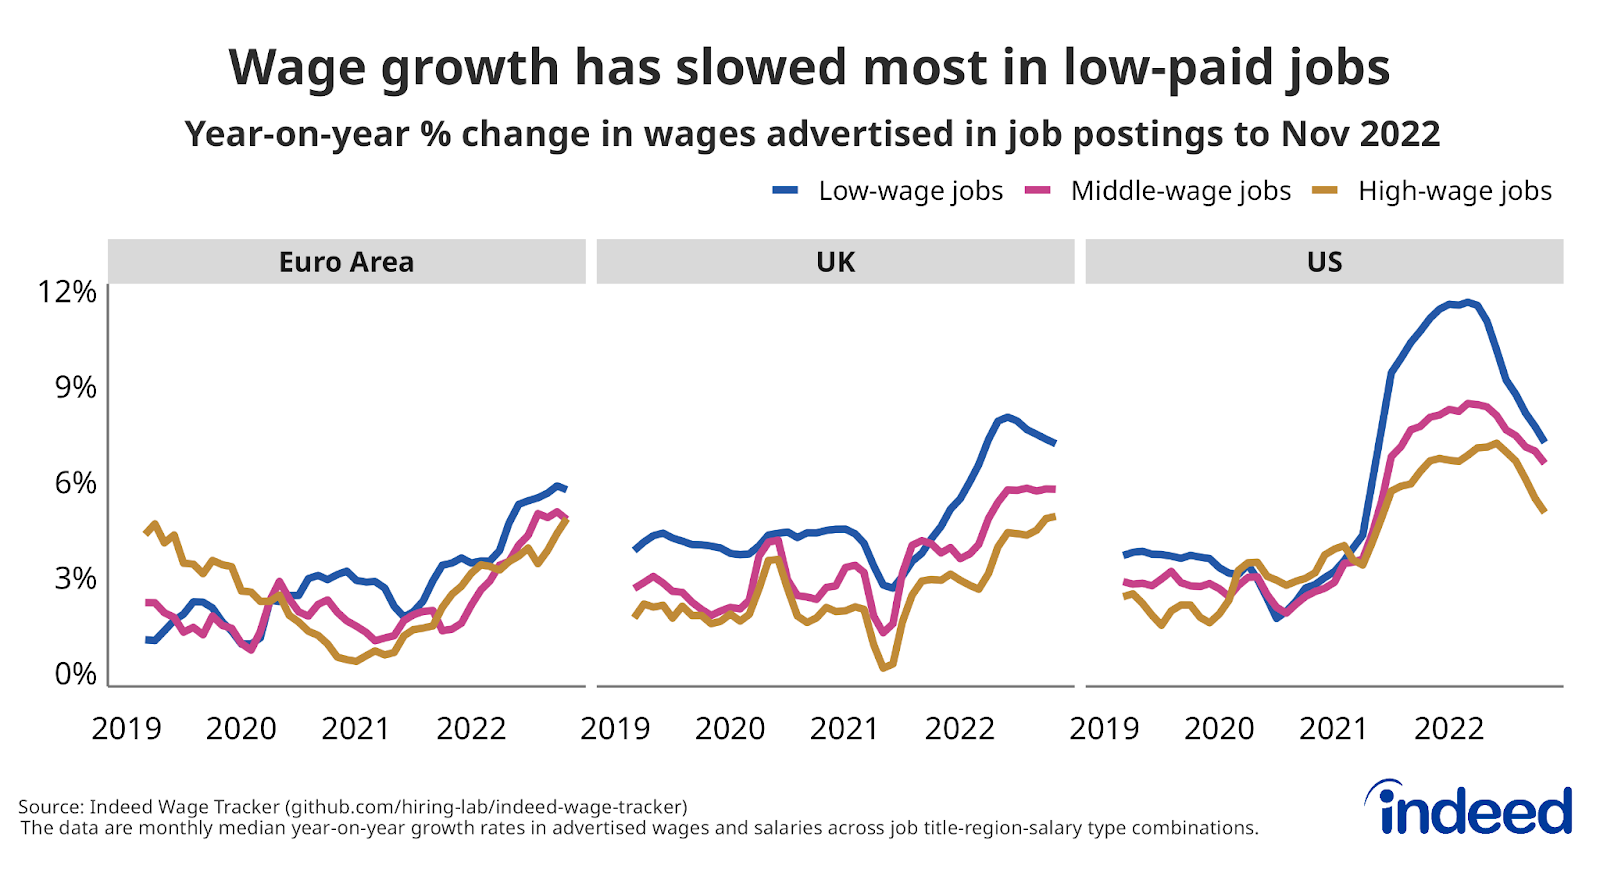 Series of line charts titled “Wage growth has slowed most in low-paid jobs.” 